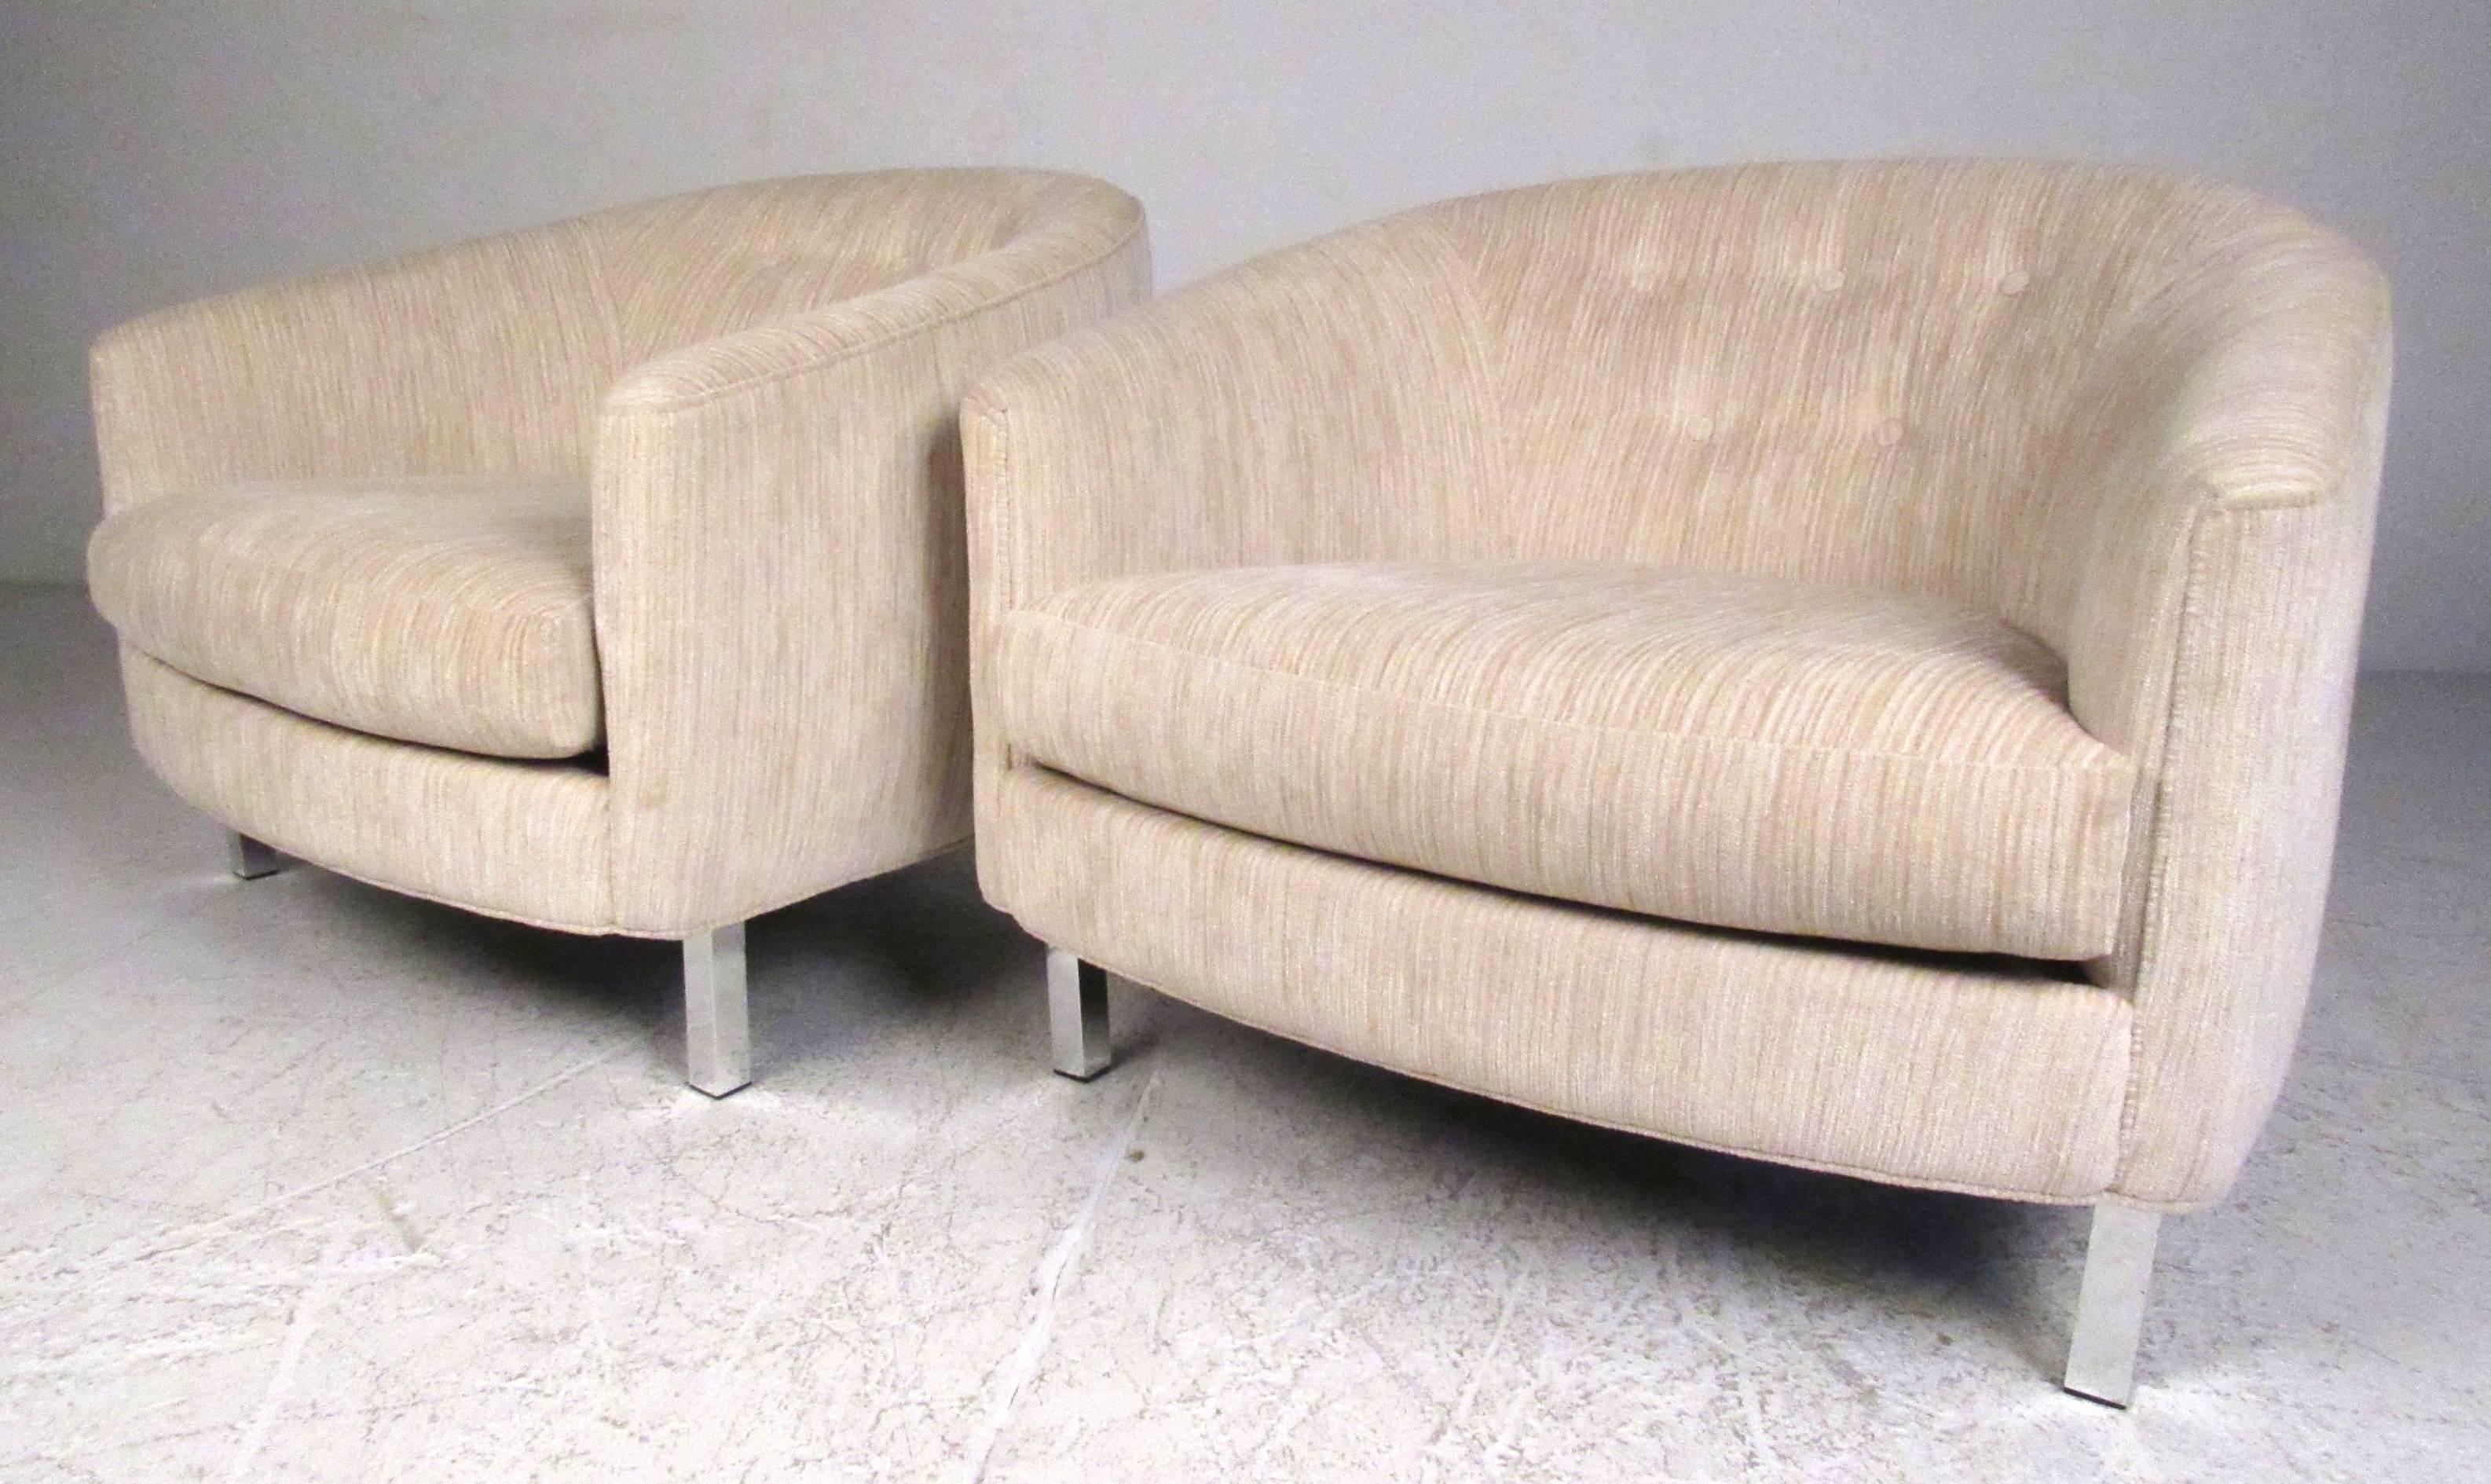 Pair of modern low profile lounge chairs with rounded tufted backs and square tube aluminum legs. Please confirm item location (NY or NJ) with dealer.